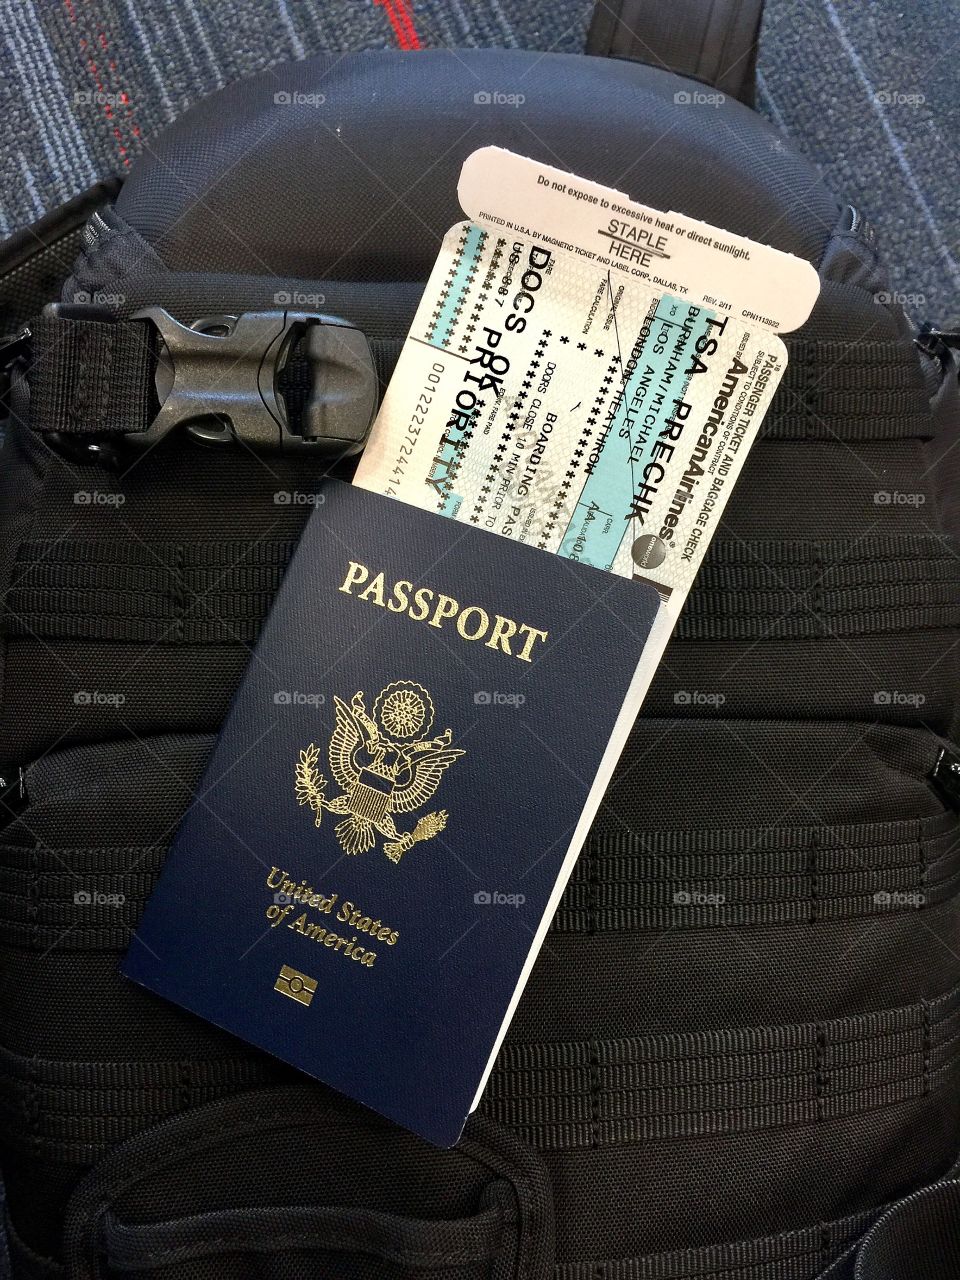 Passport and boarding pass on a carry-on bag waiting to board the airplane for the next flight. 